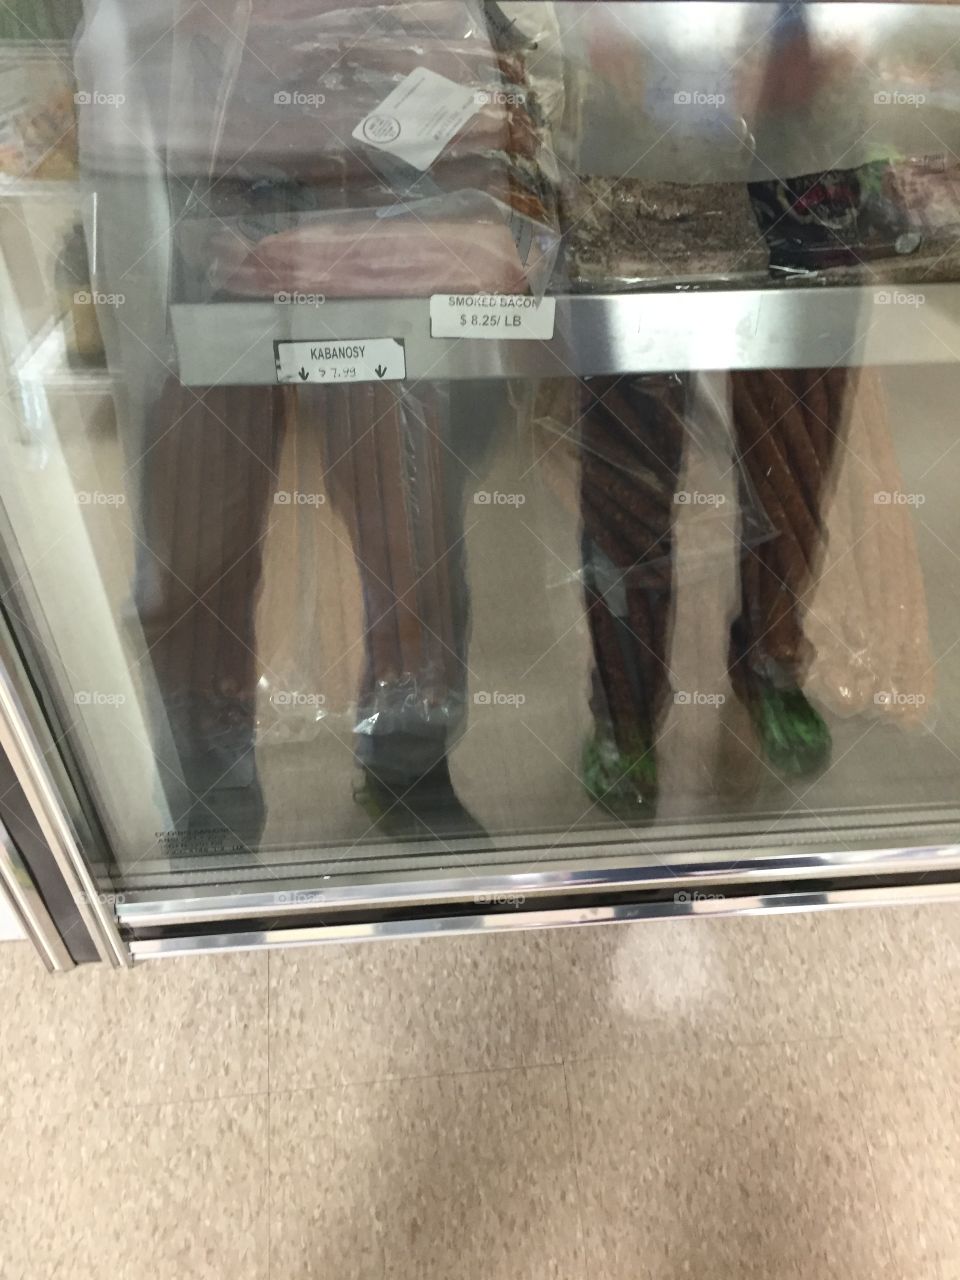 2 Men. Picture taken of two men from the waist down through display glass.
